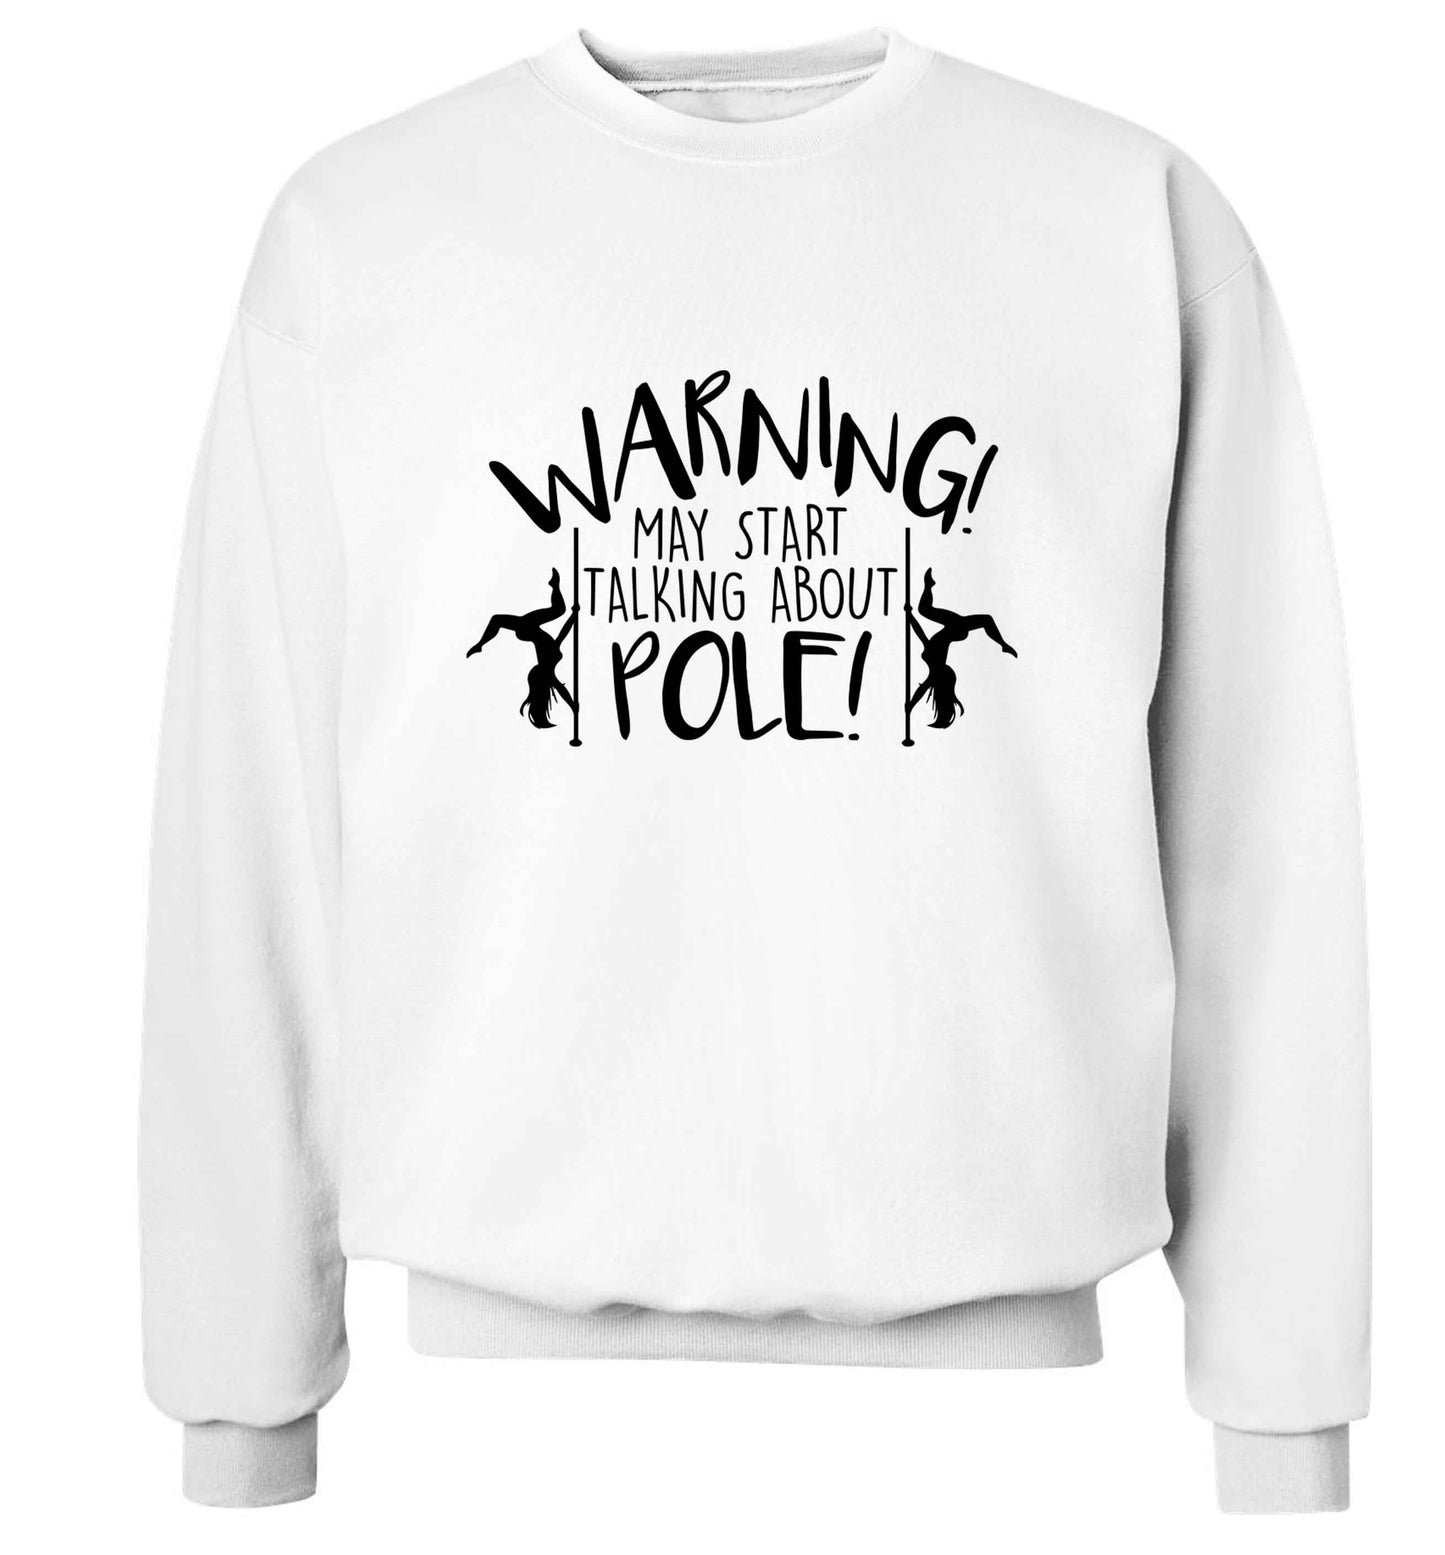 Warning may start talking about pole  adult's unisex white sweater 2XL